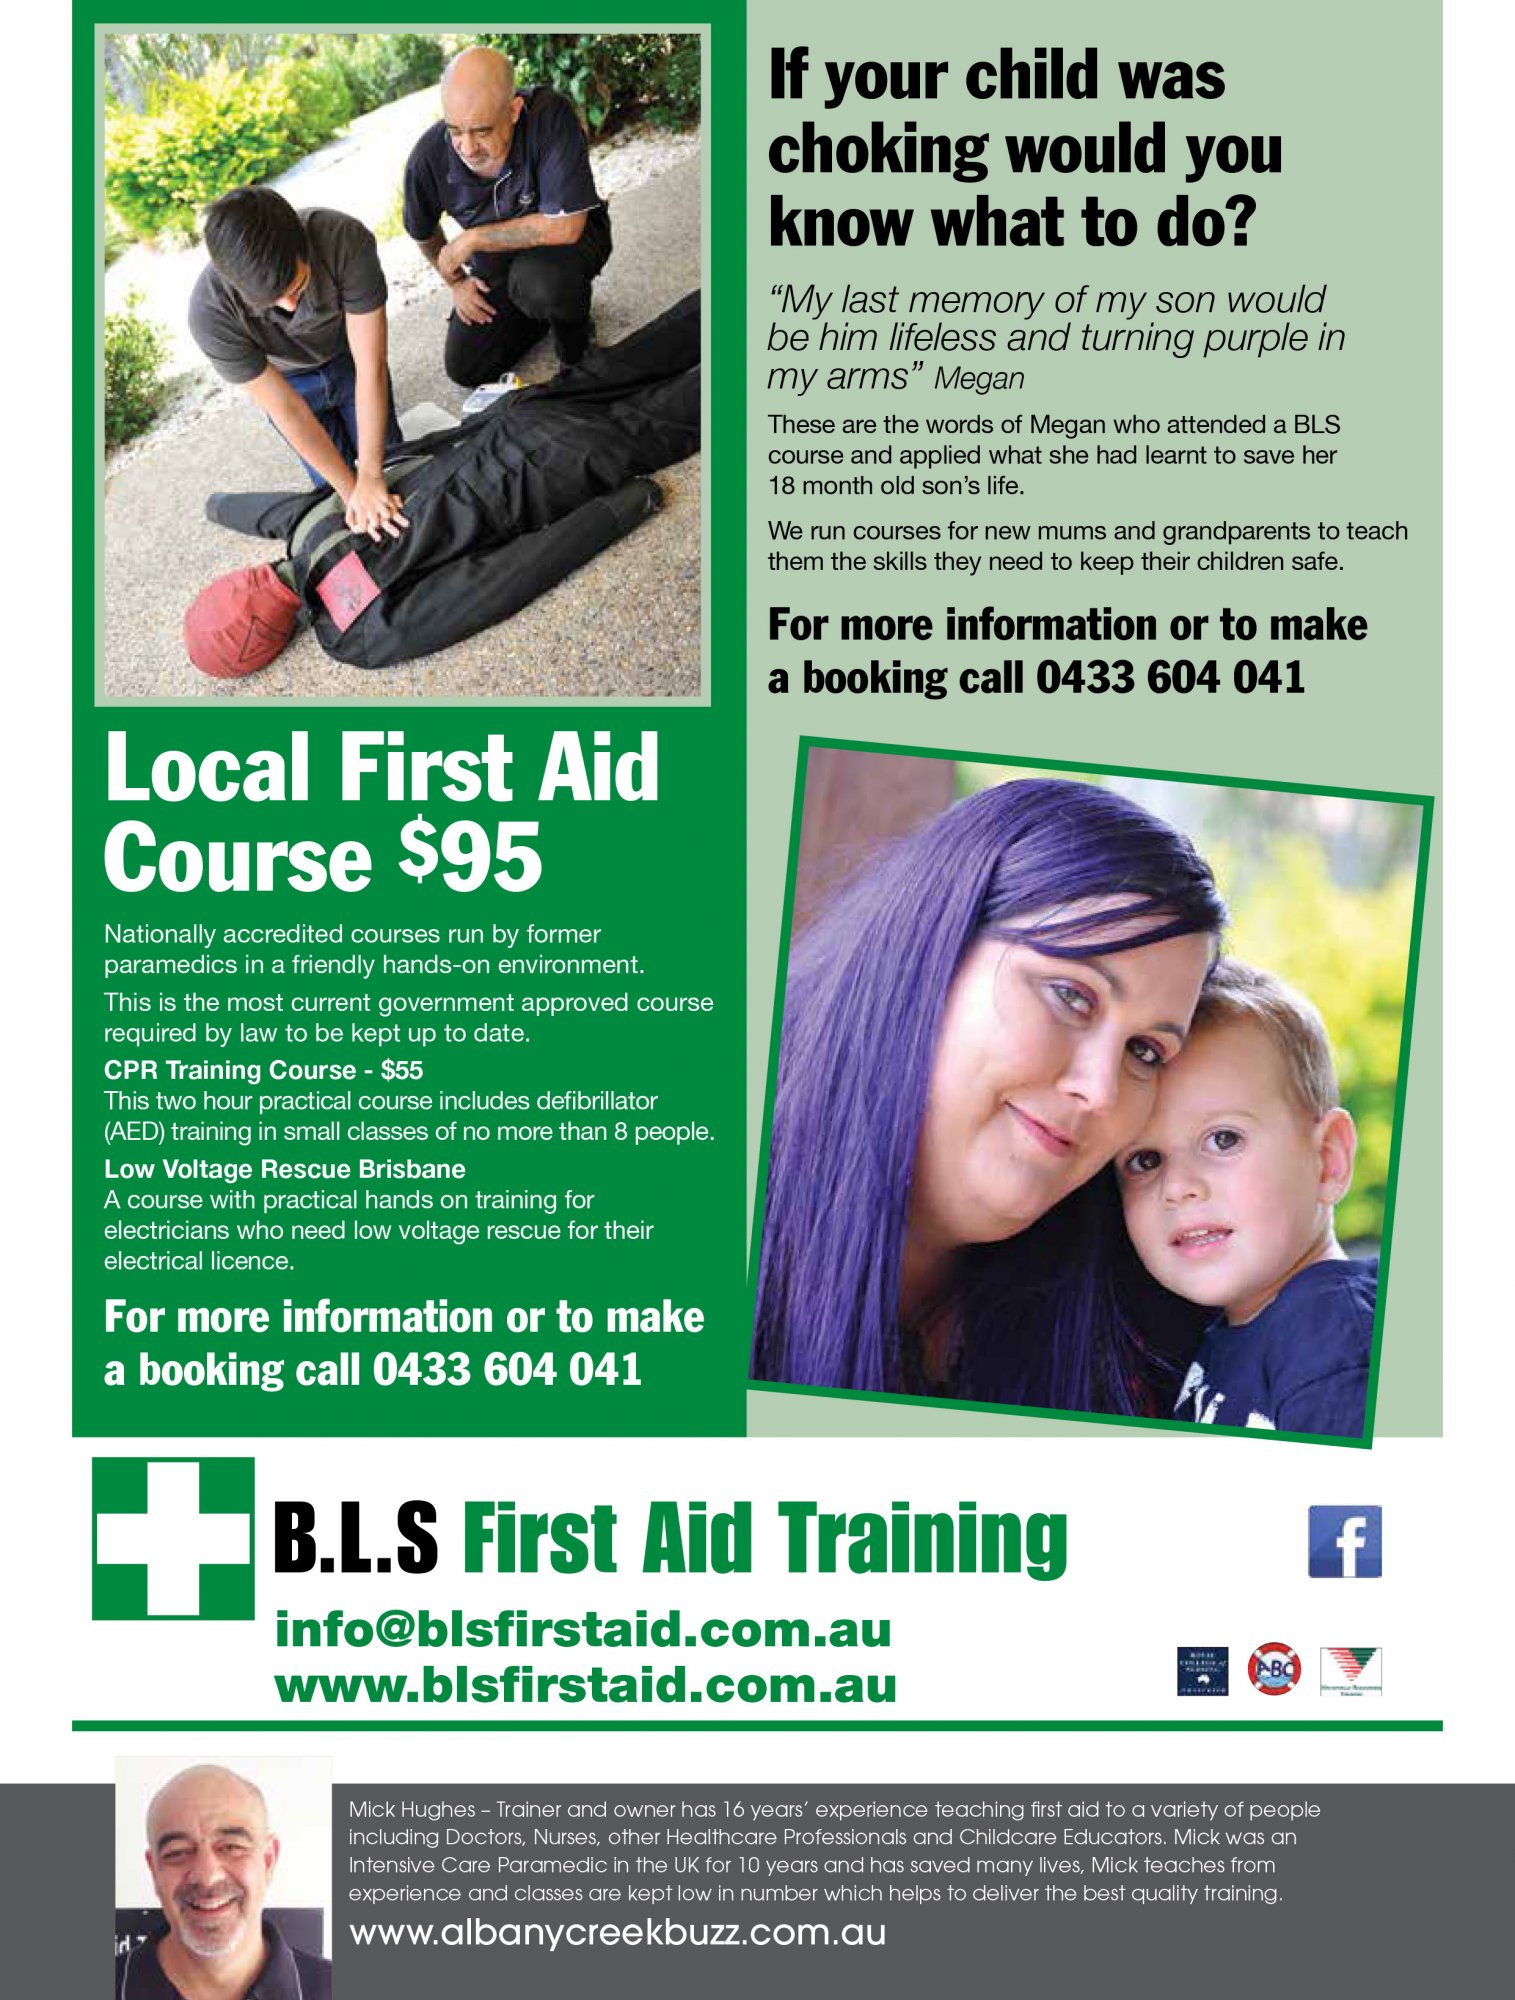 First Aid training course advertisement